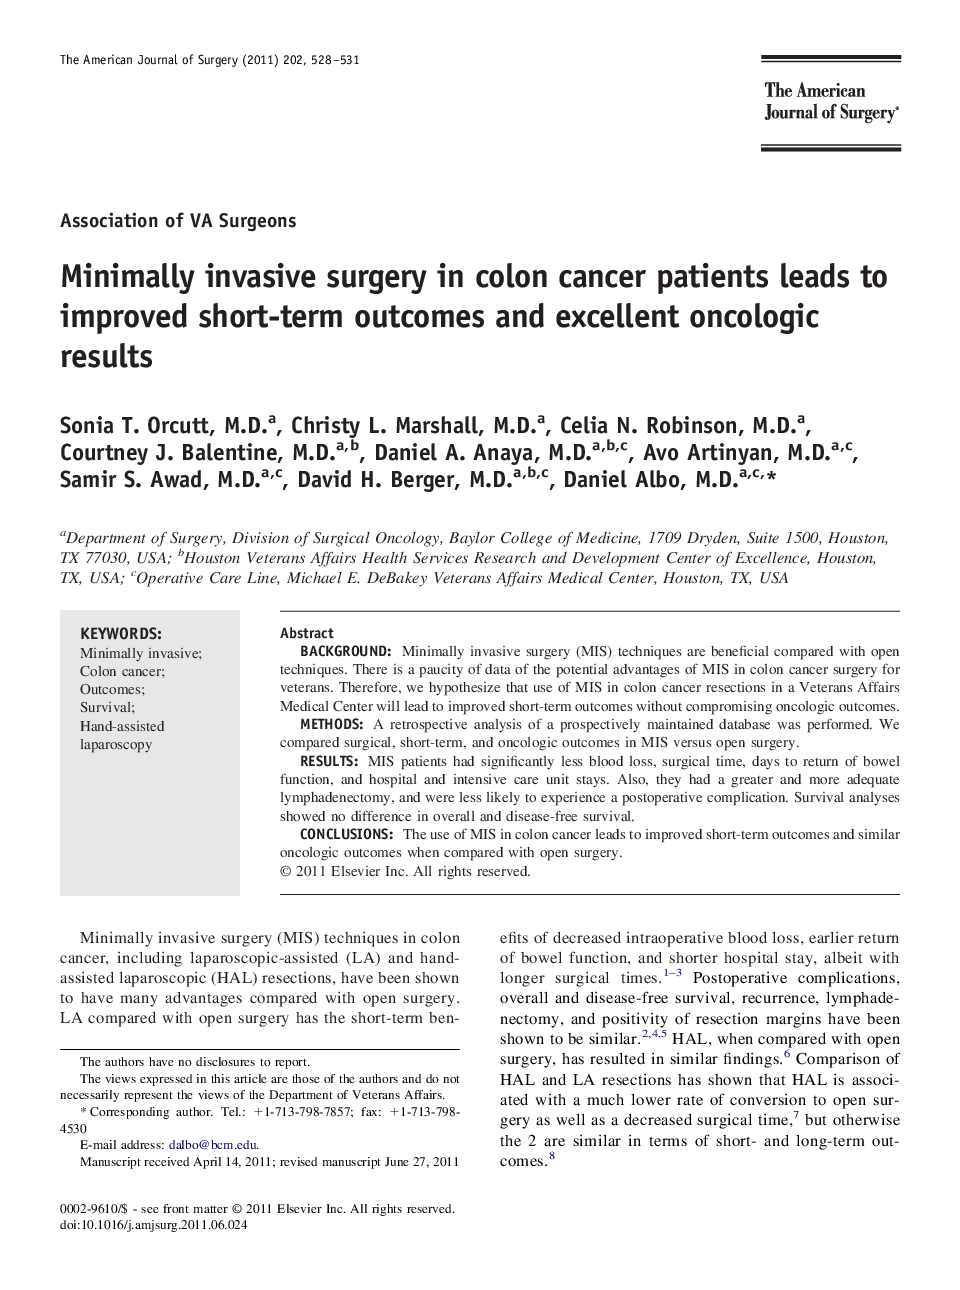 Minimally invasive surgery in colon cancer patients leads to improved short-term outcomes and excellent oncologic results 